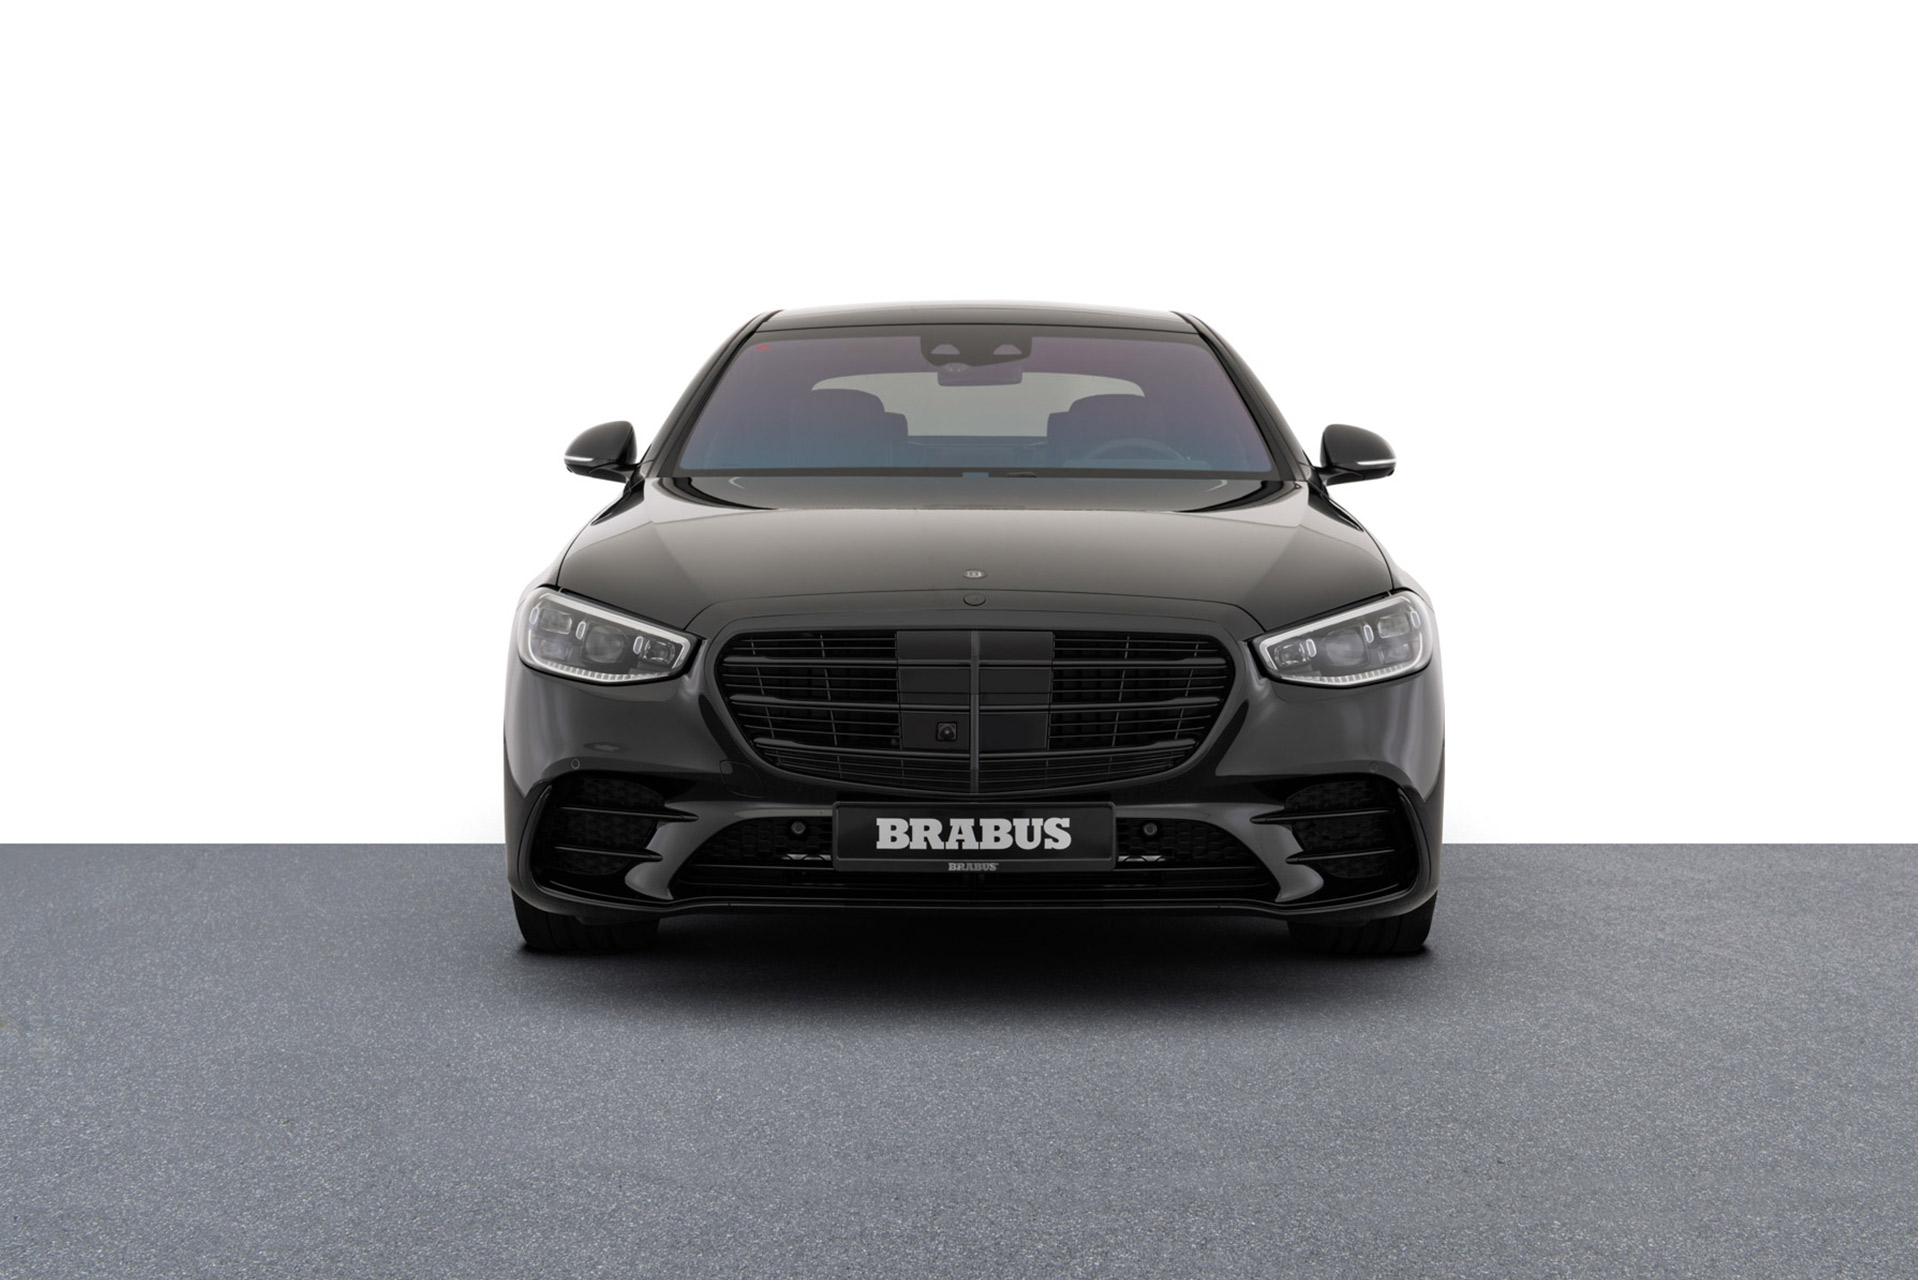 Check price and buy New BRABUS 500 Mercedes-Benz S 500 L 4MATIC For Sale